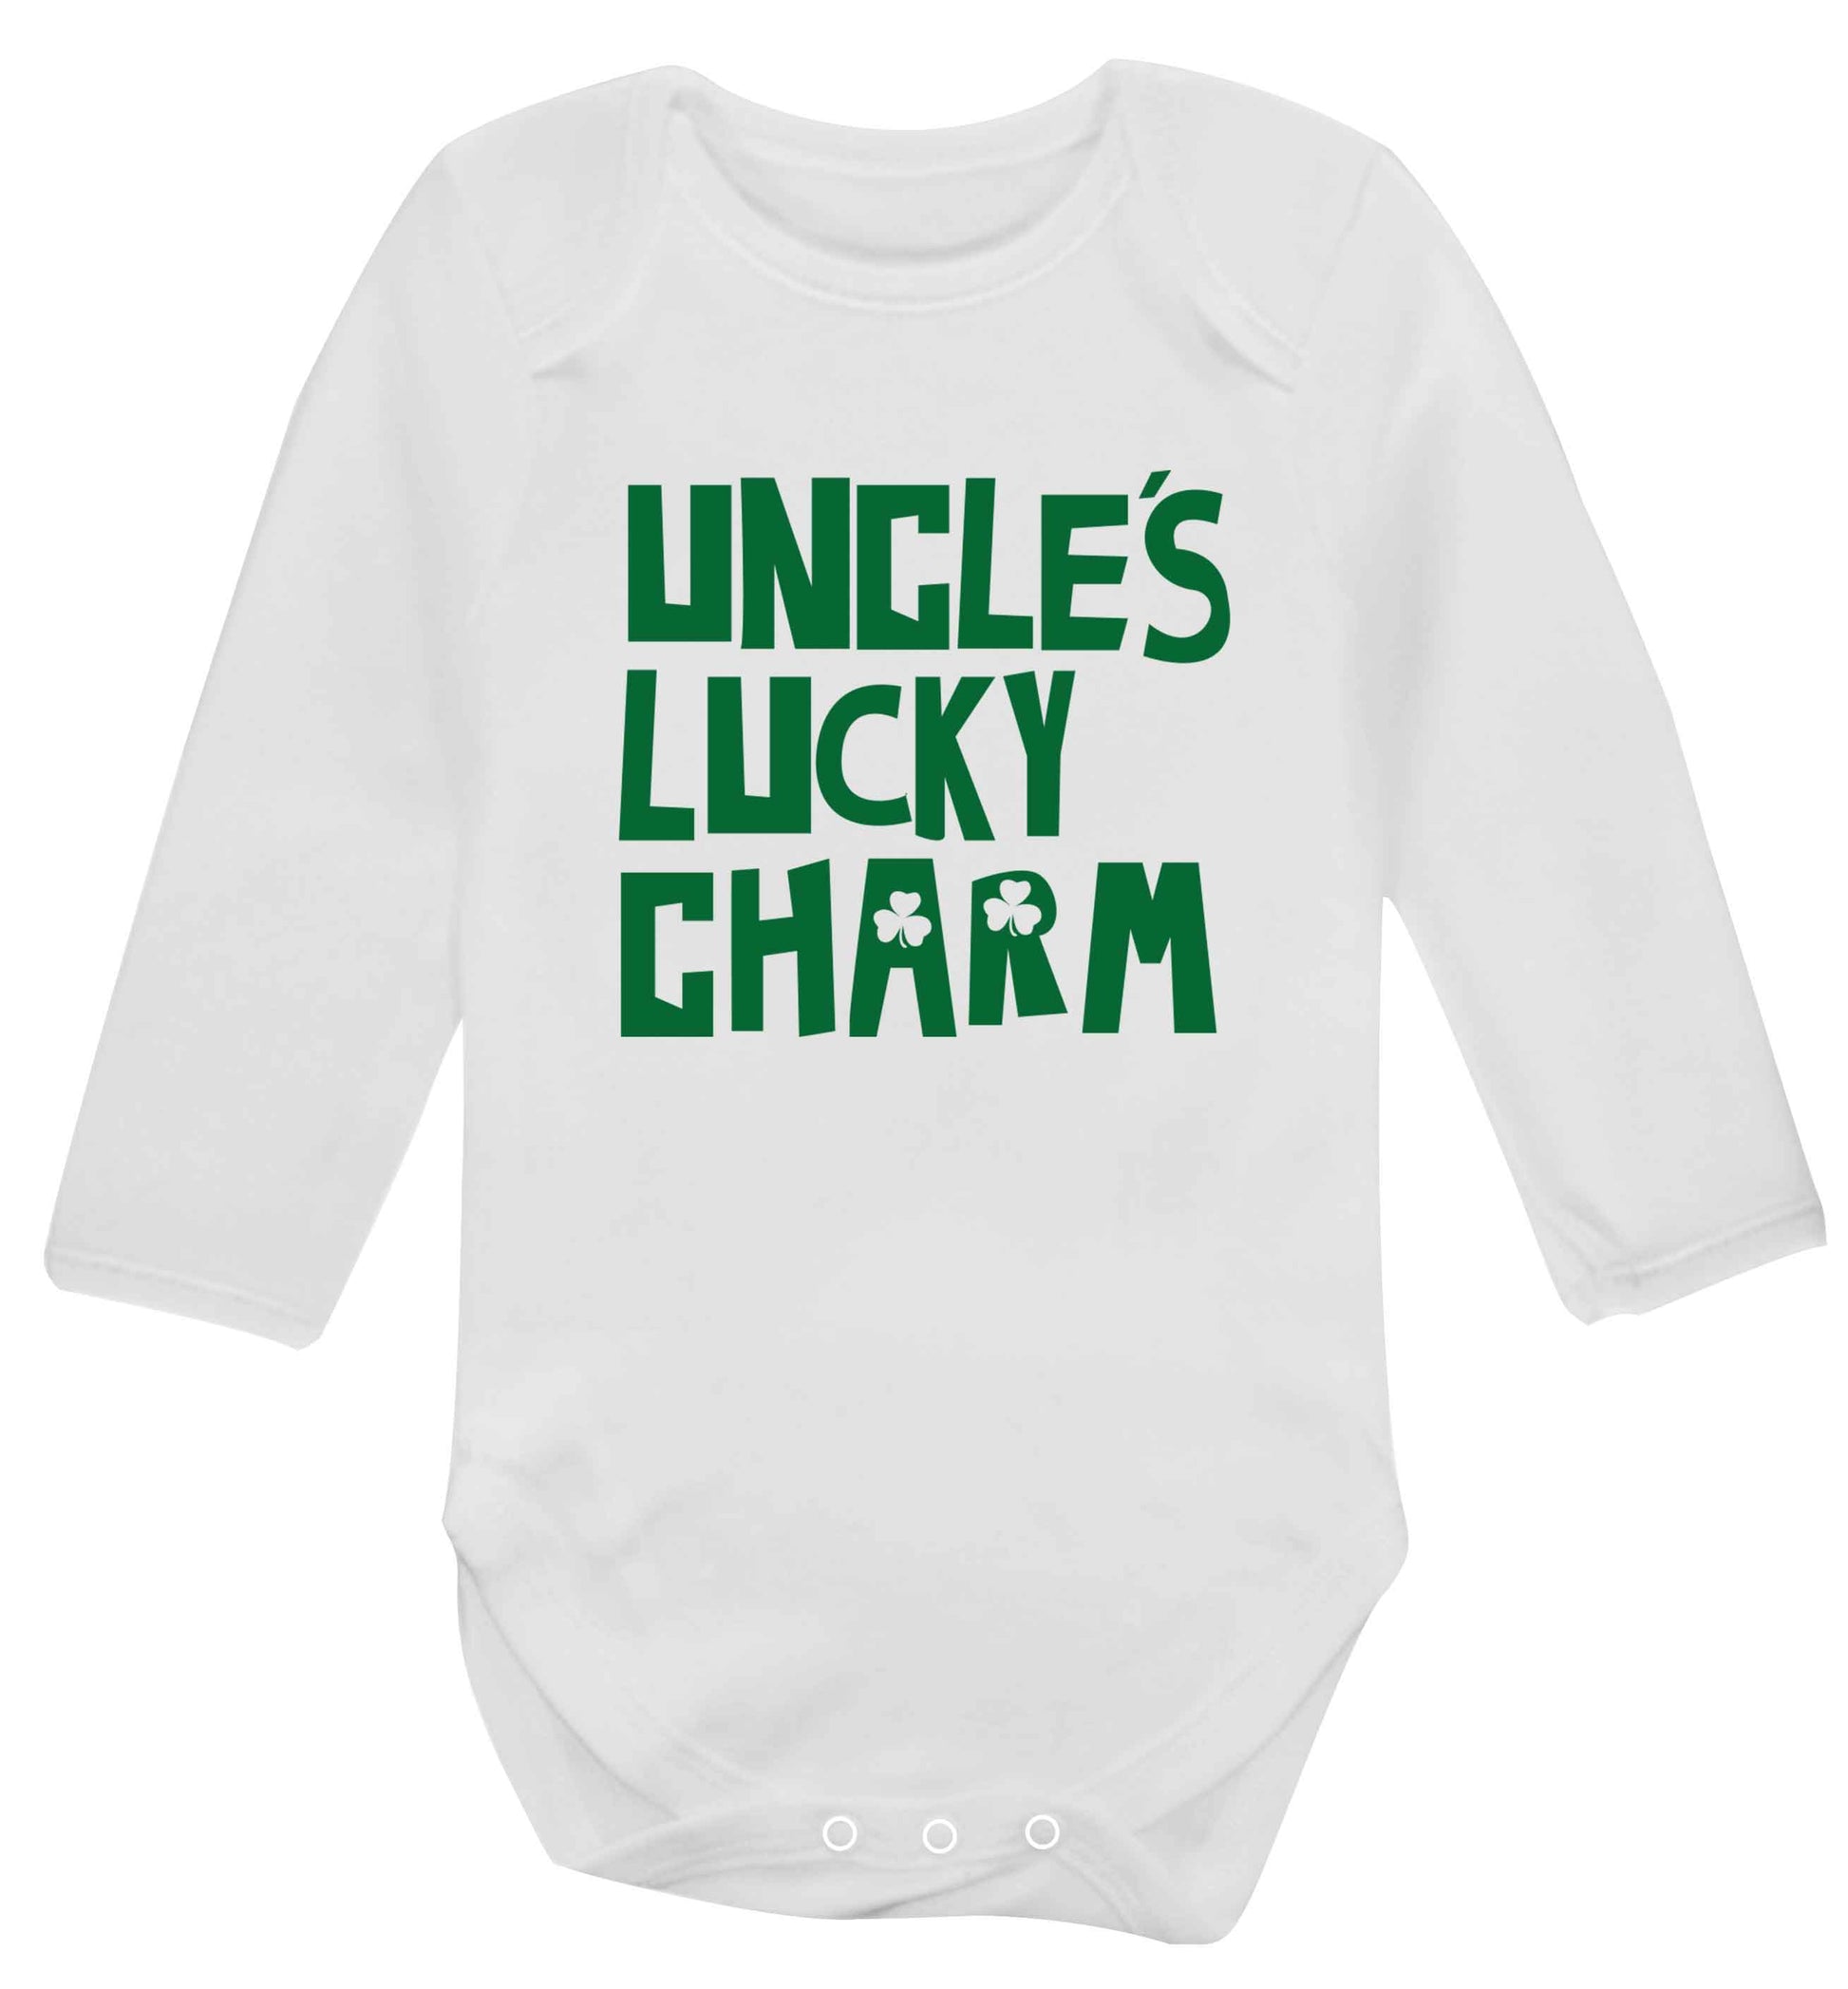 Uncles lucky charm baby vest long sleeved white 6-12 months